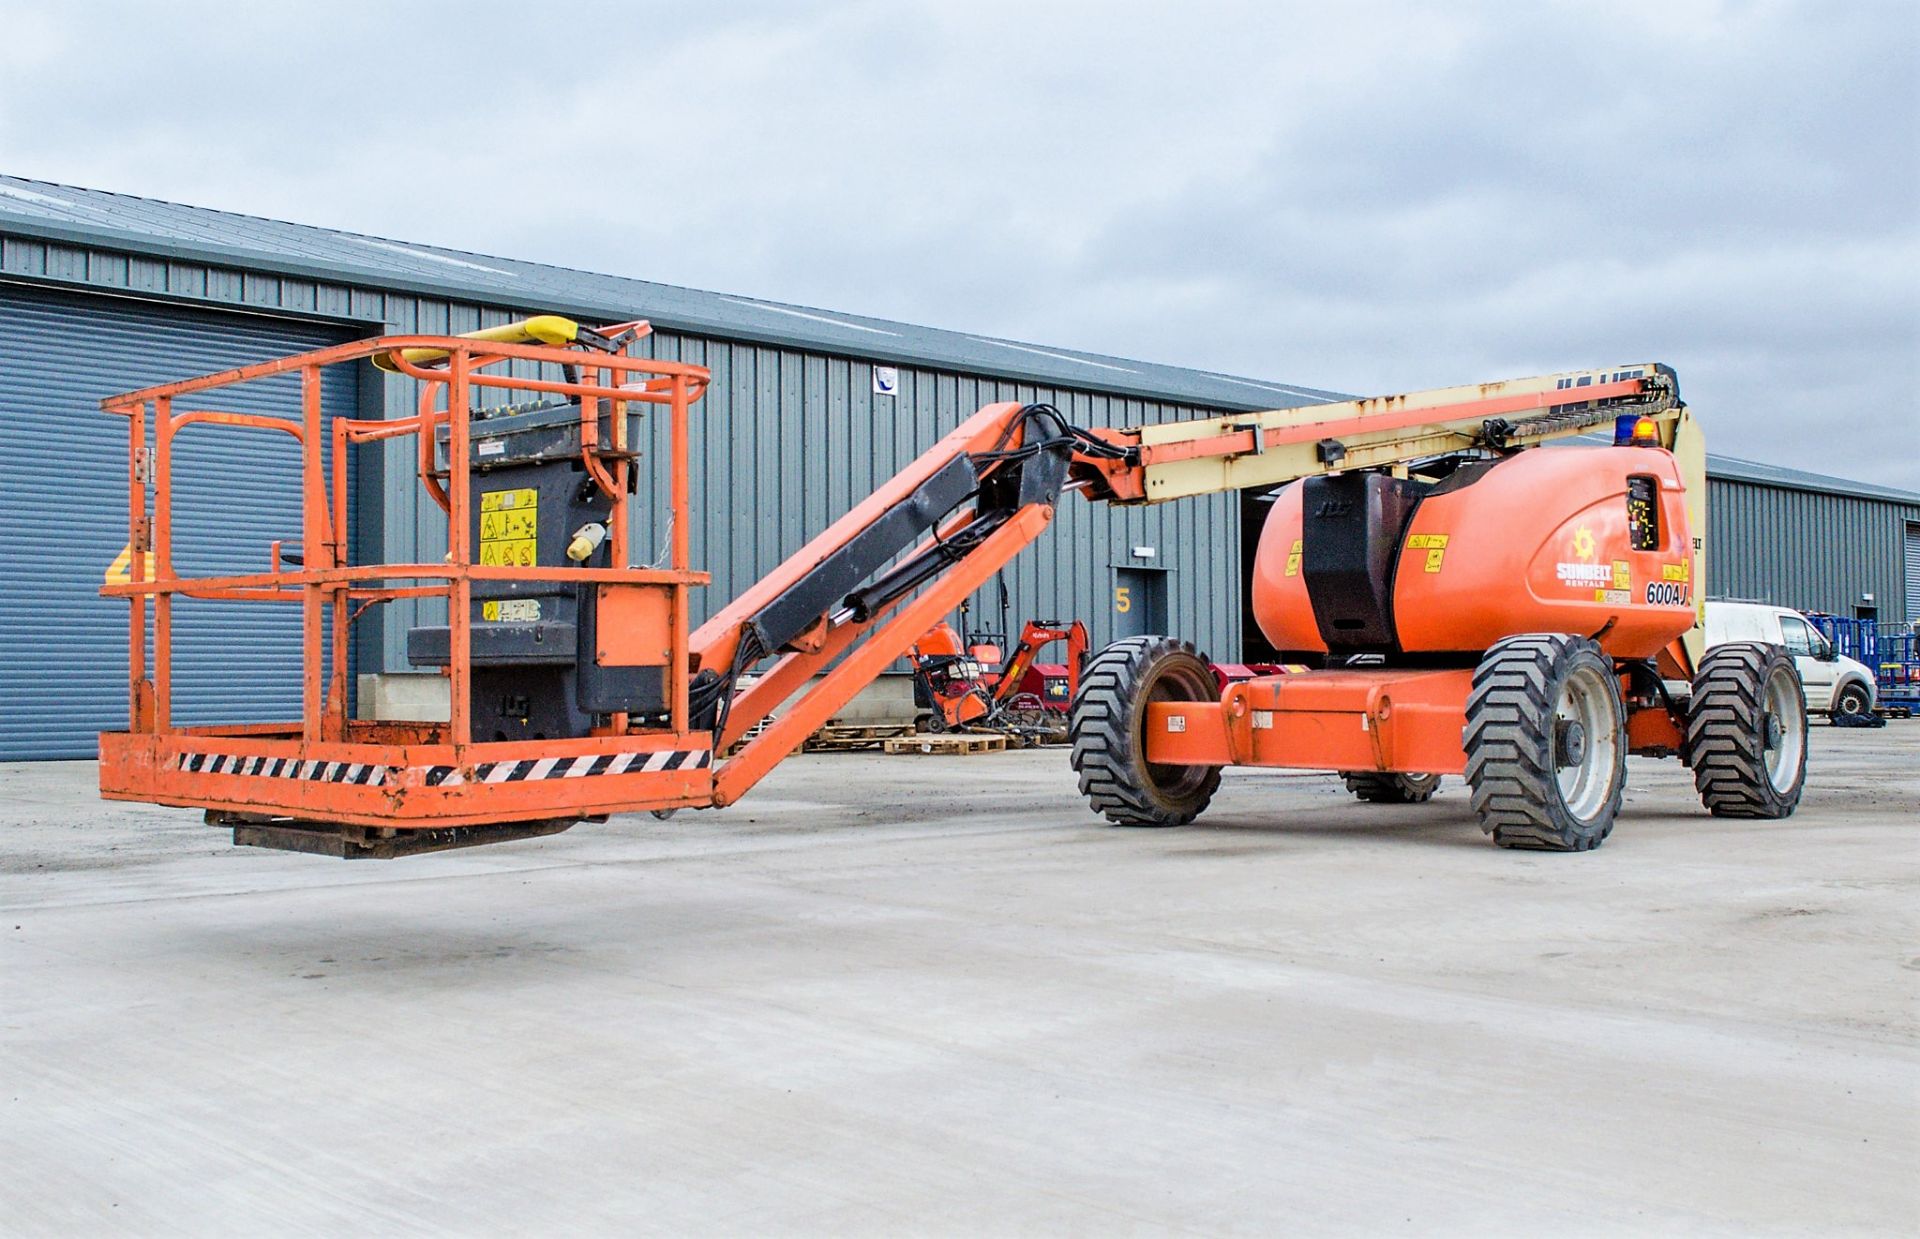 JLG 600AJ diesel driven articulated boom lift access platform Year: 2012 S/N: 60997 Recorded